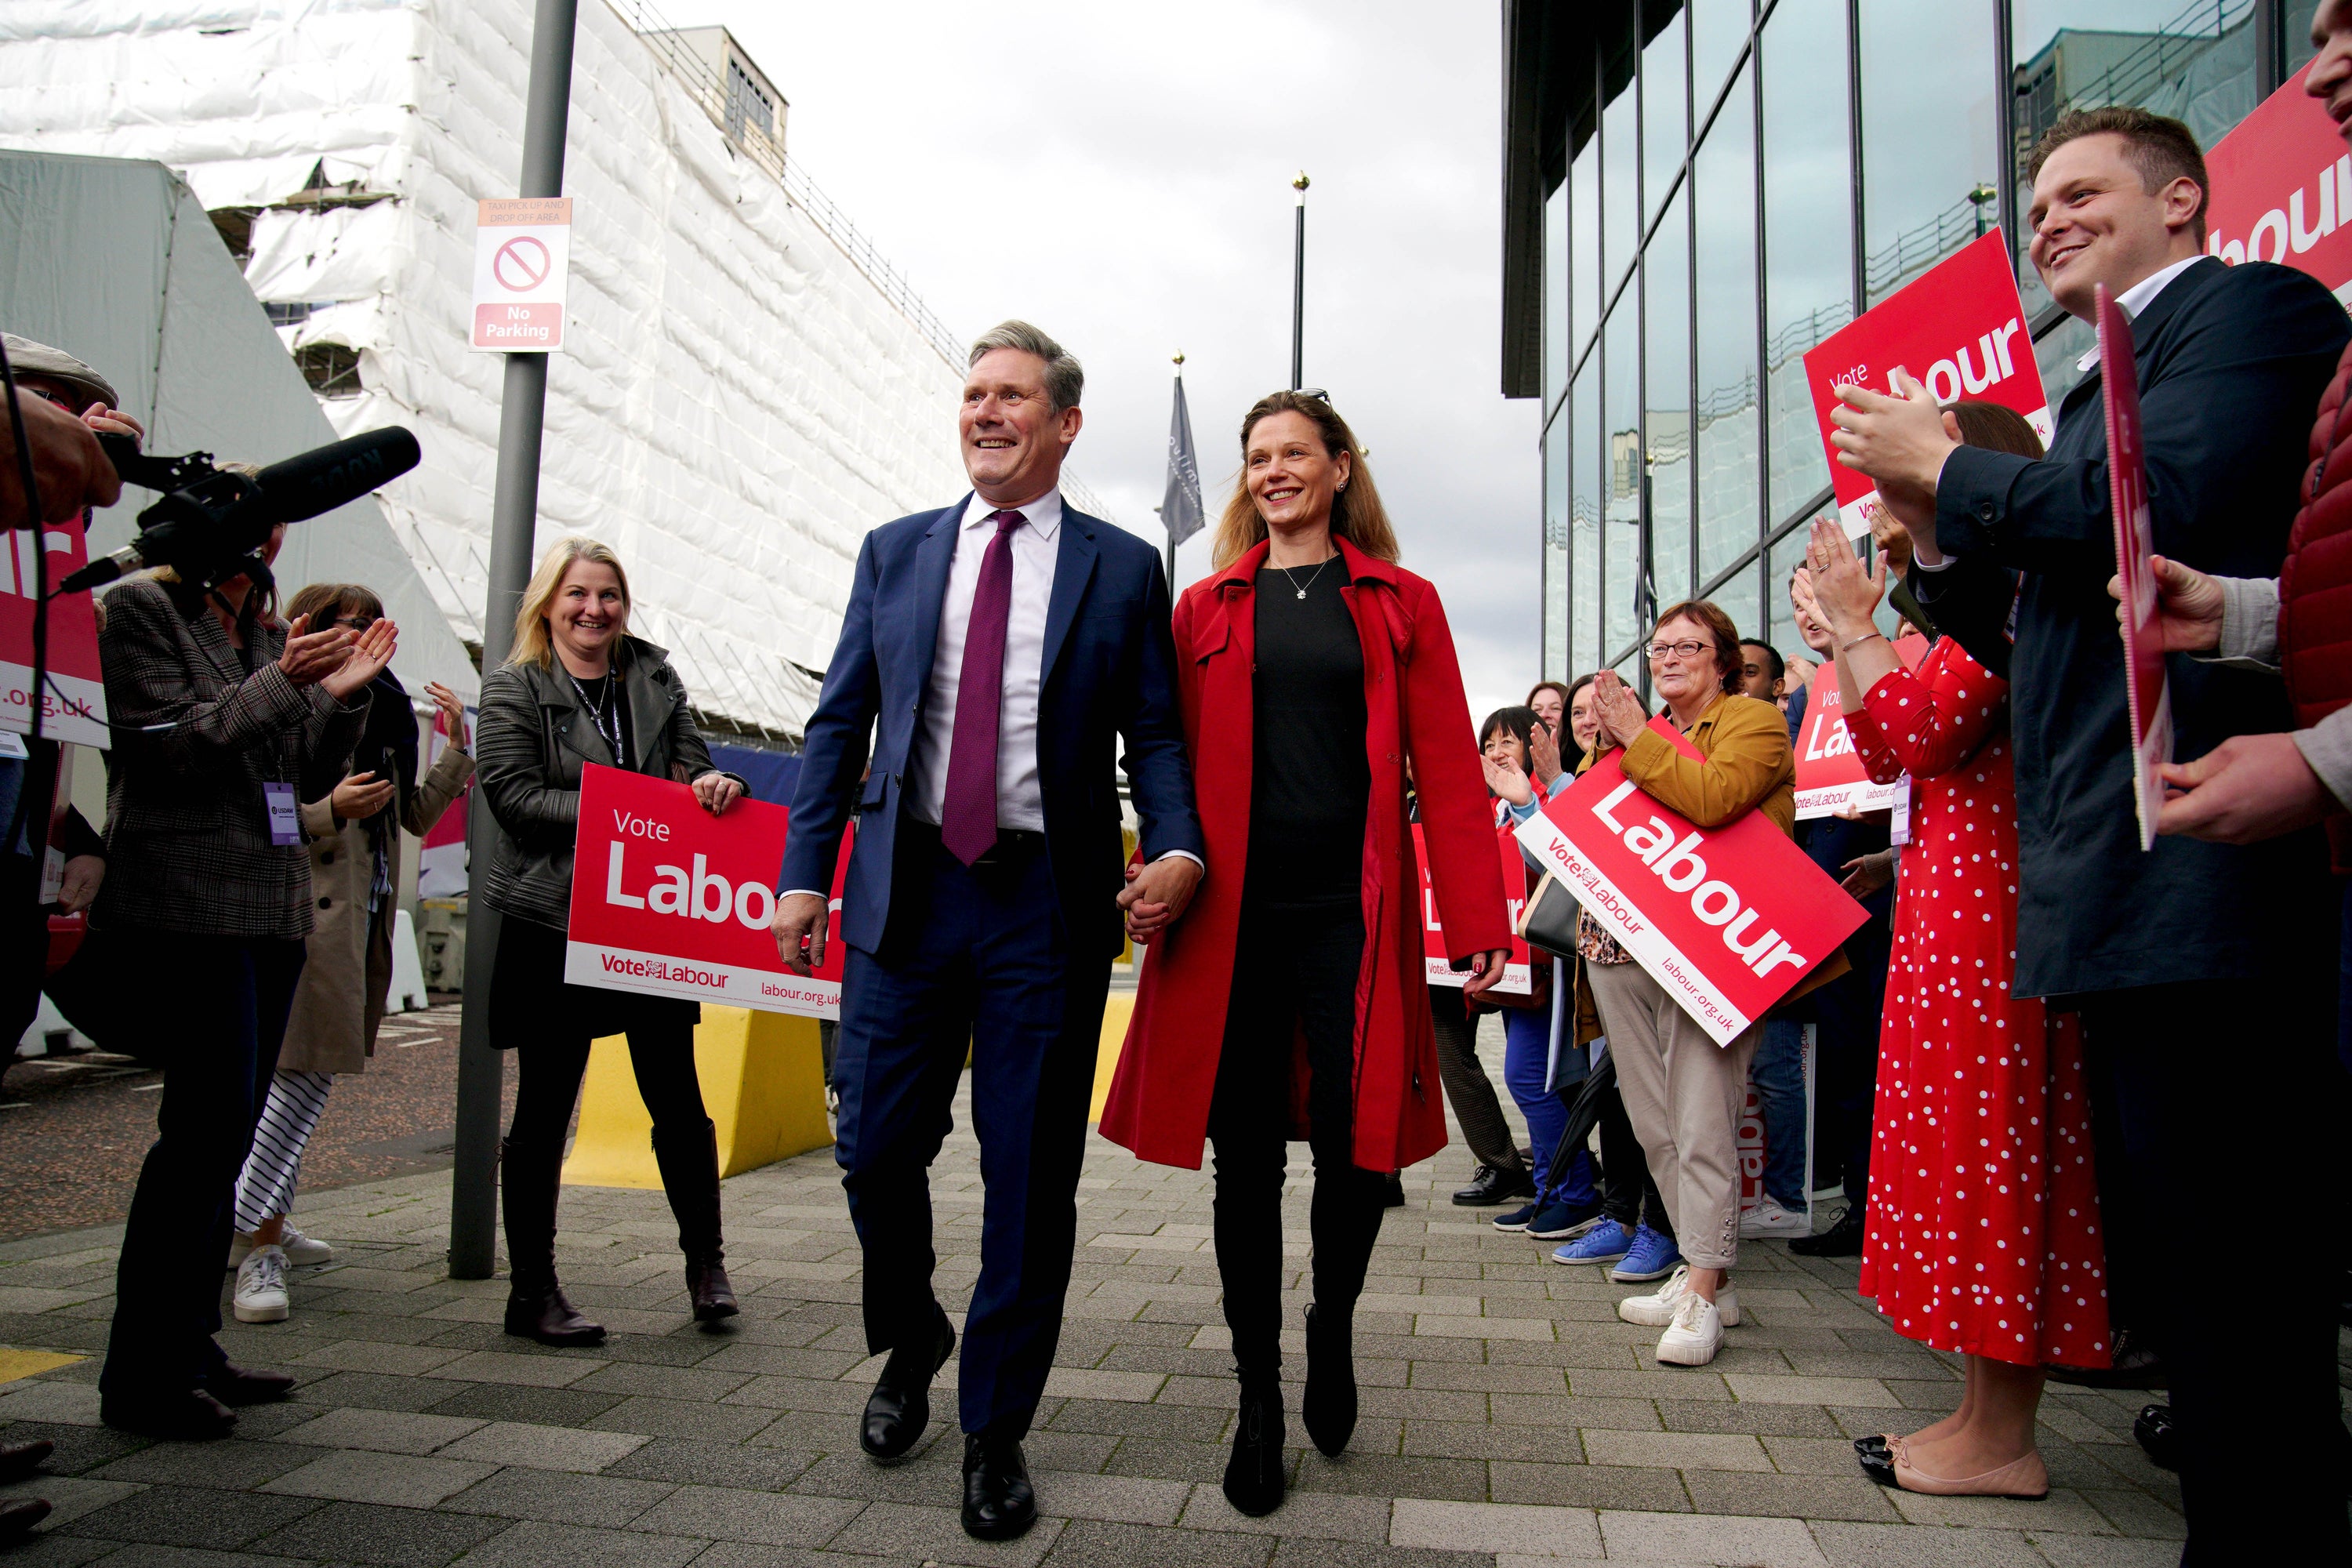 Sir Keir Starmer and his wife Victoria are greeted by Labour supporters as they arrive at the Pullman Hotel Liverpool ahead of the Labour Party conference (Peter Byrne/PA)